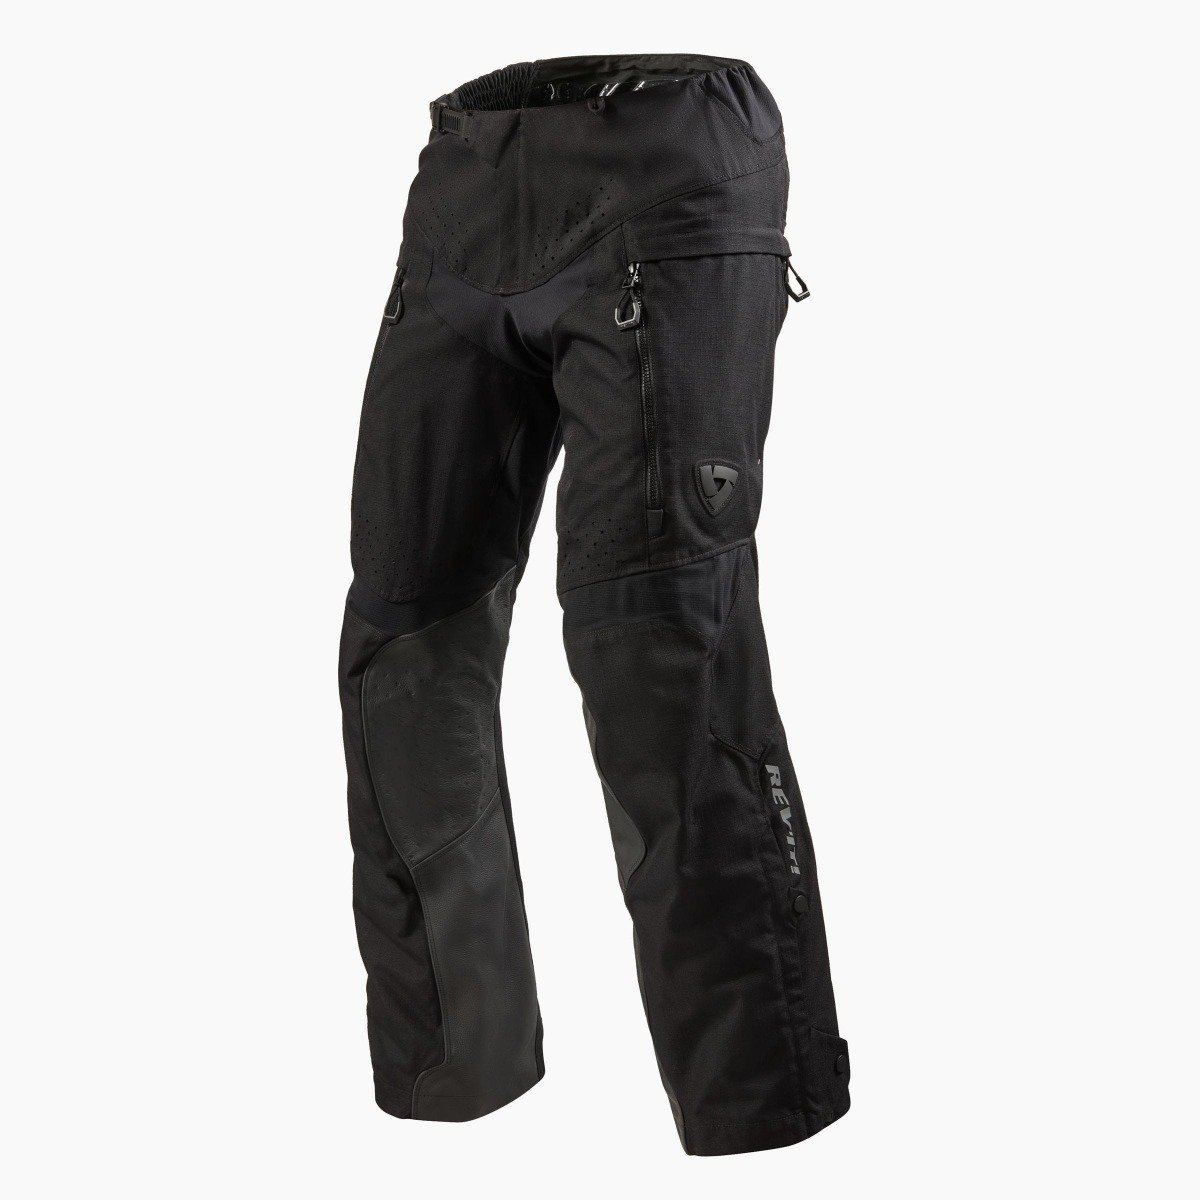 Image of REV'IT! Continent Long Black Motorcycle Pants Size 2XL ID 8700001297165